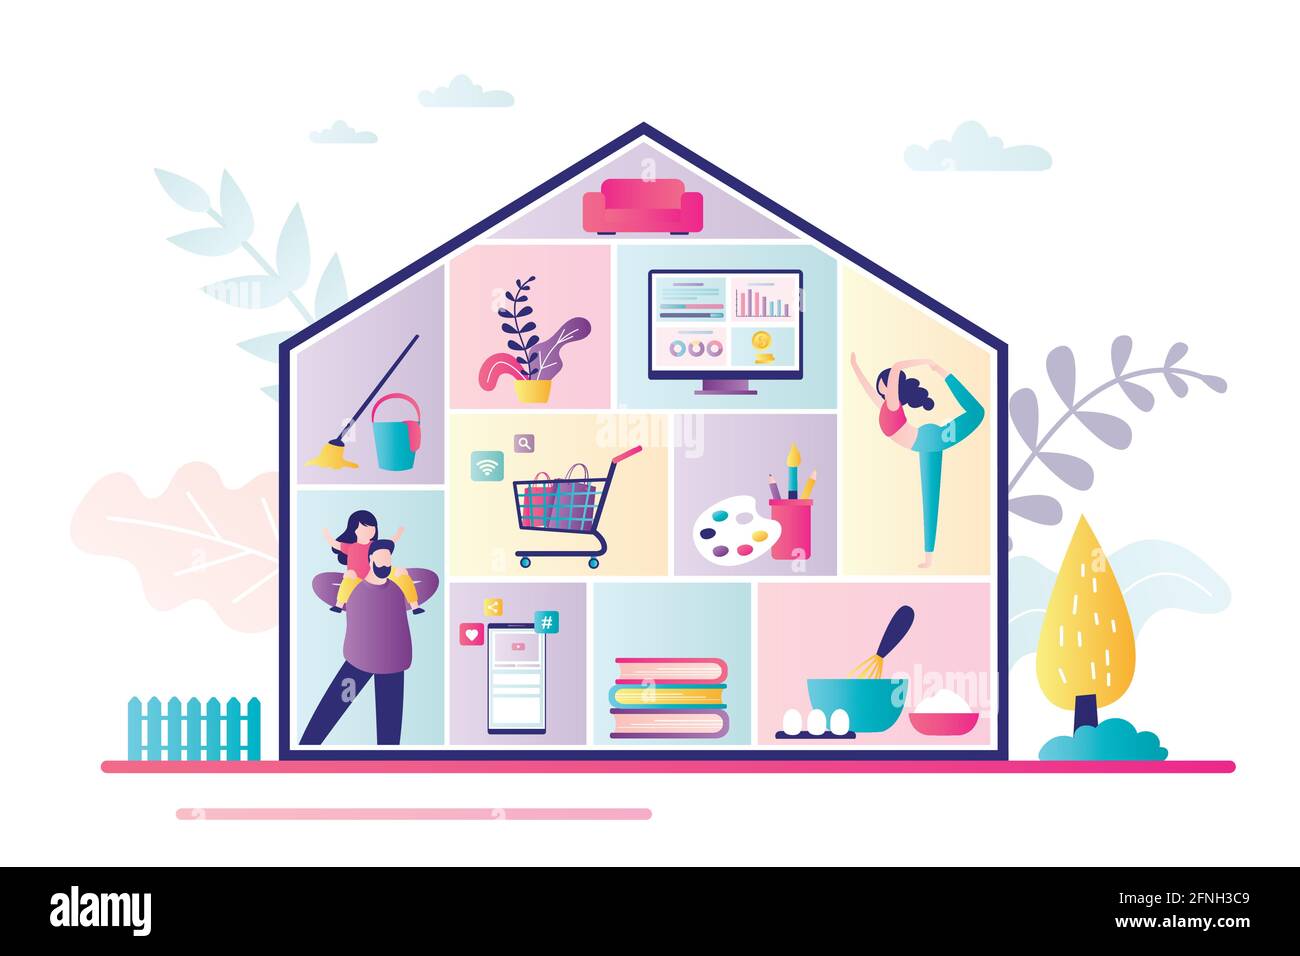 https://c8.alamy.com/comp/2FNH3C9/home-activities-entertainments-and-works-family-at-home-house-silhouette-with-rooms-people-and-household-items-self-isolation-or-quarantinetrend-2FNH3C9.jpg